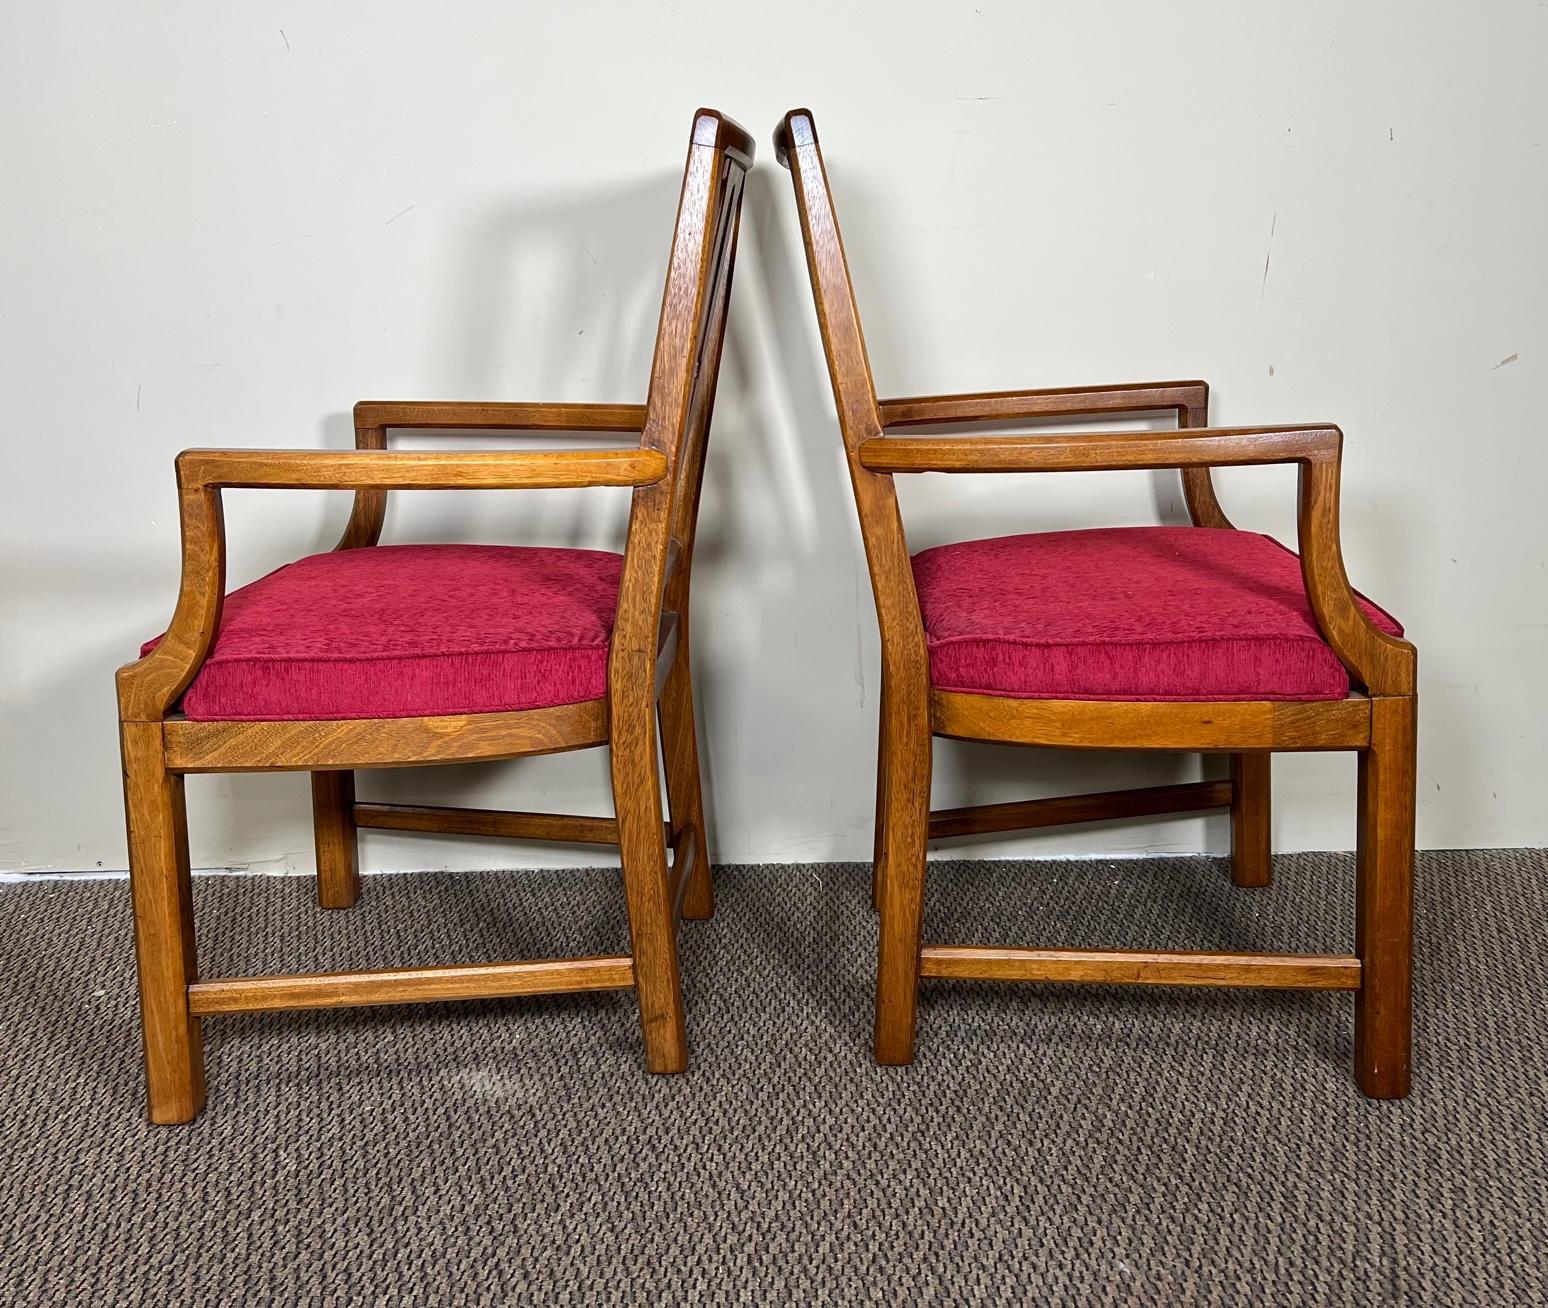 Set of 6 Mid-Century Modern Walnut Dining Chairs with Red Seats by Henredon For Sale 9